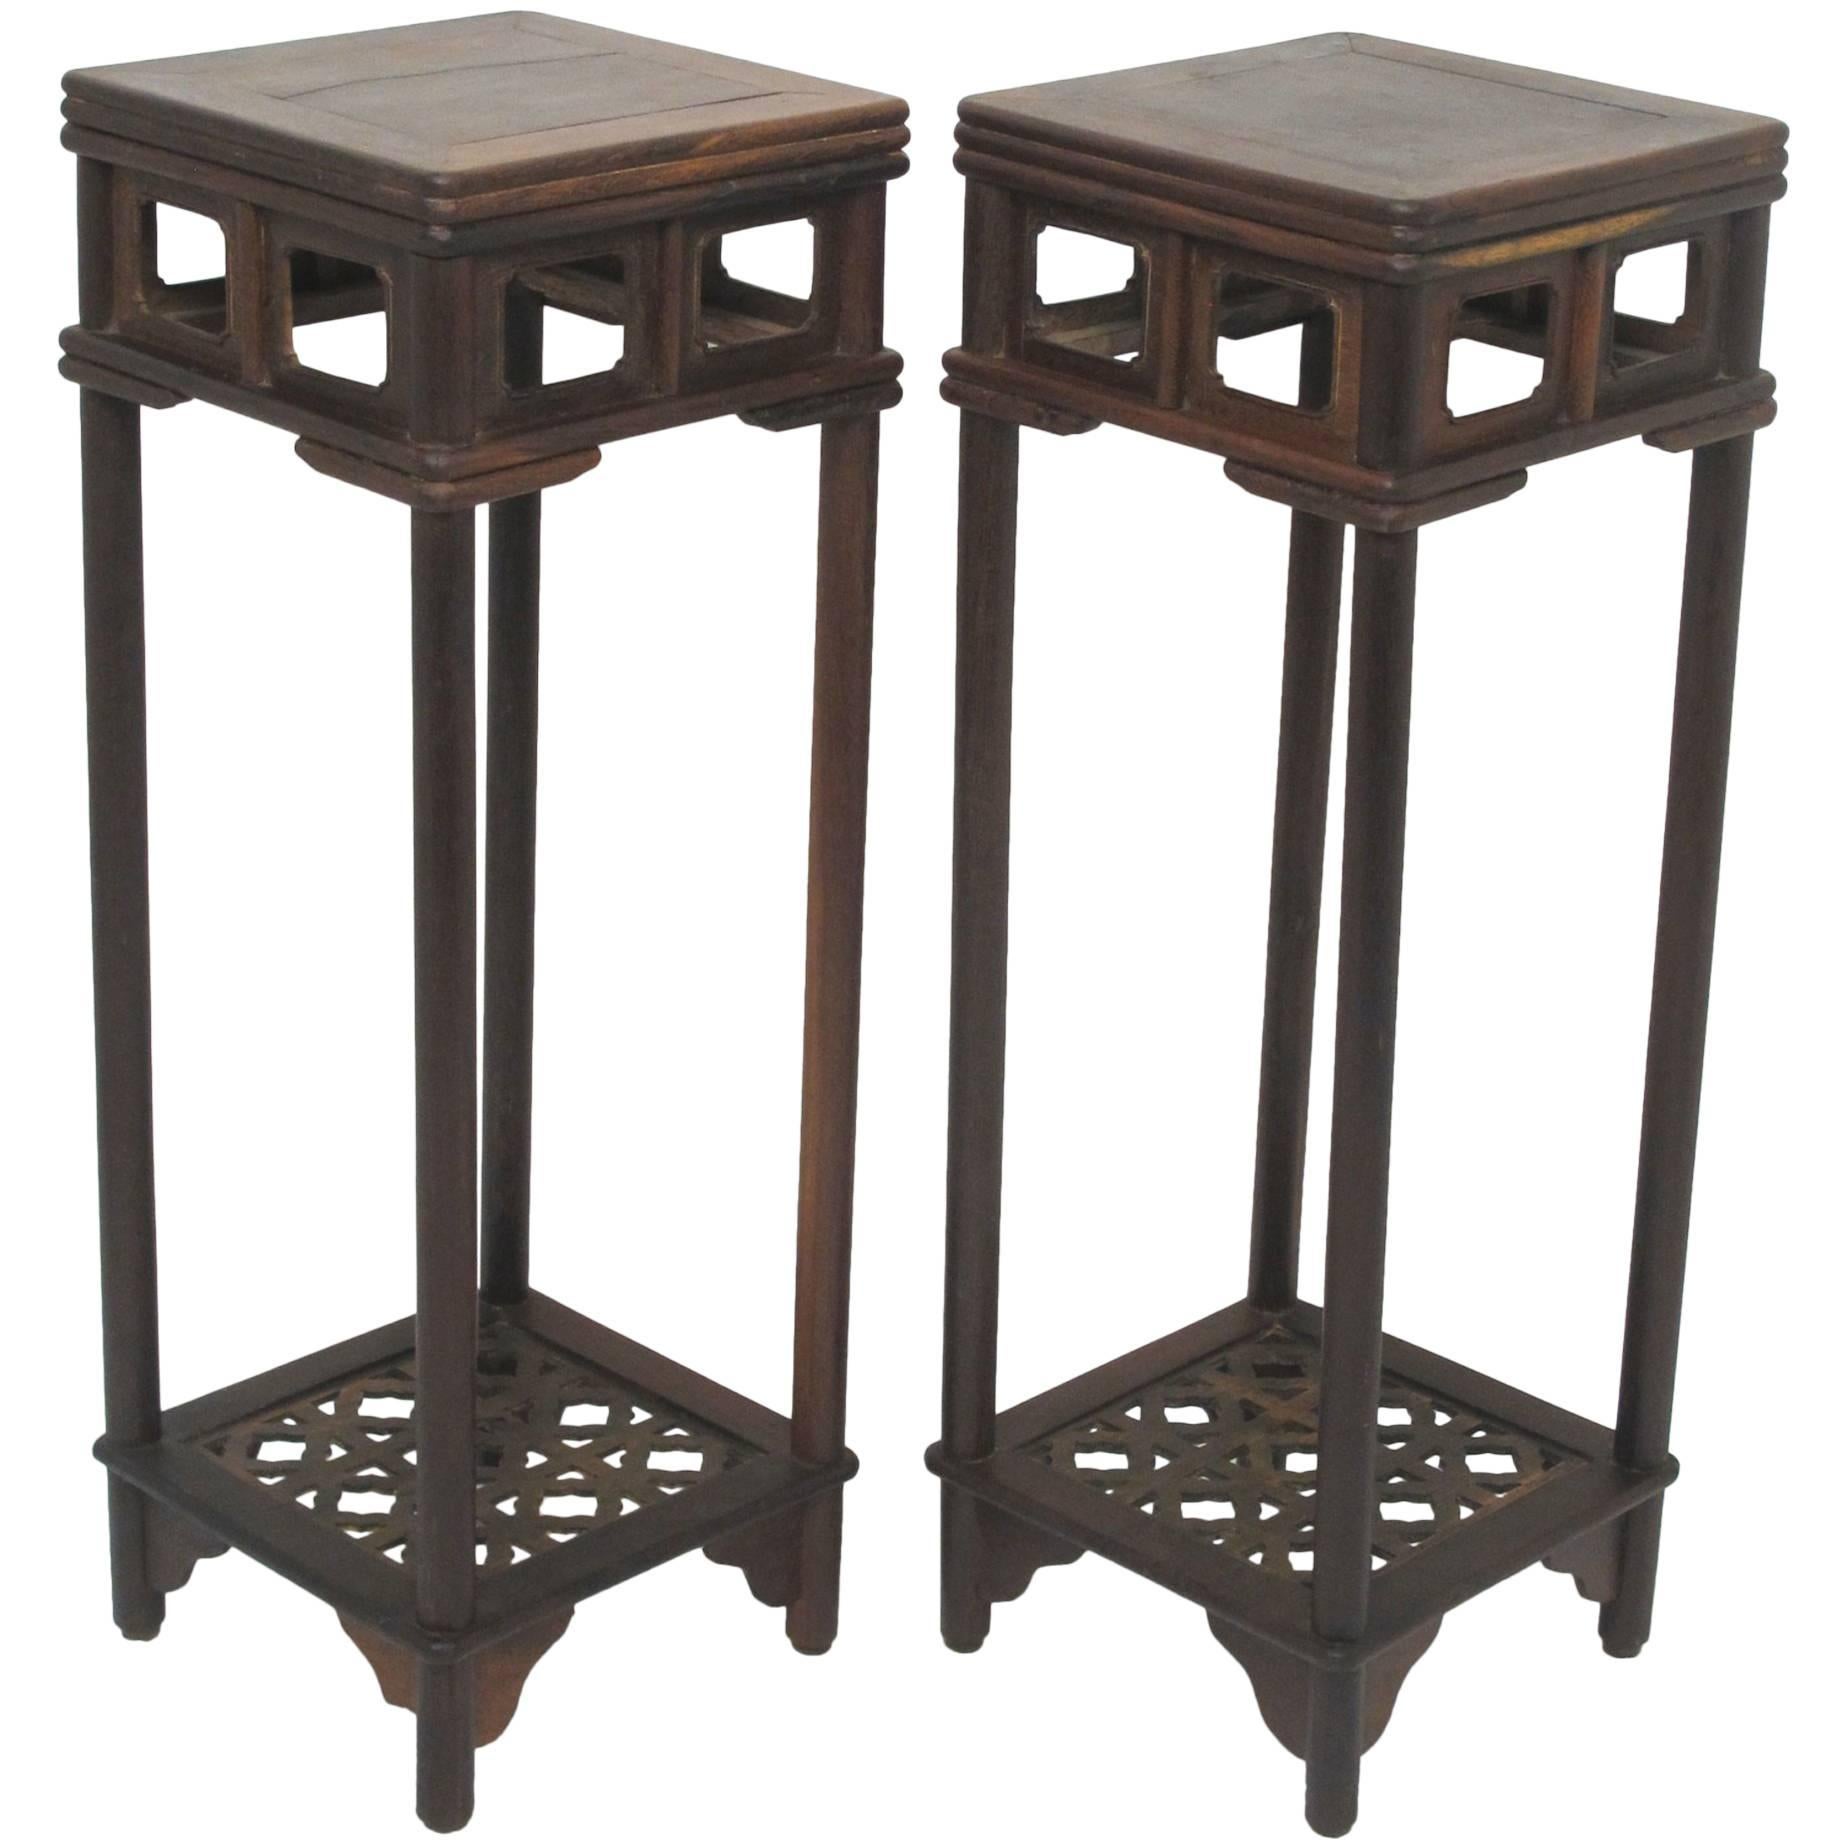 Pair of Chicken Wing Wood Pedestals Chinese